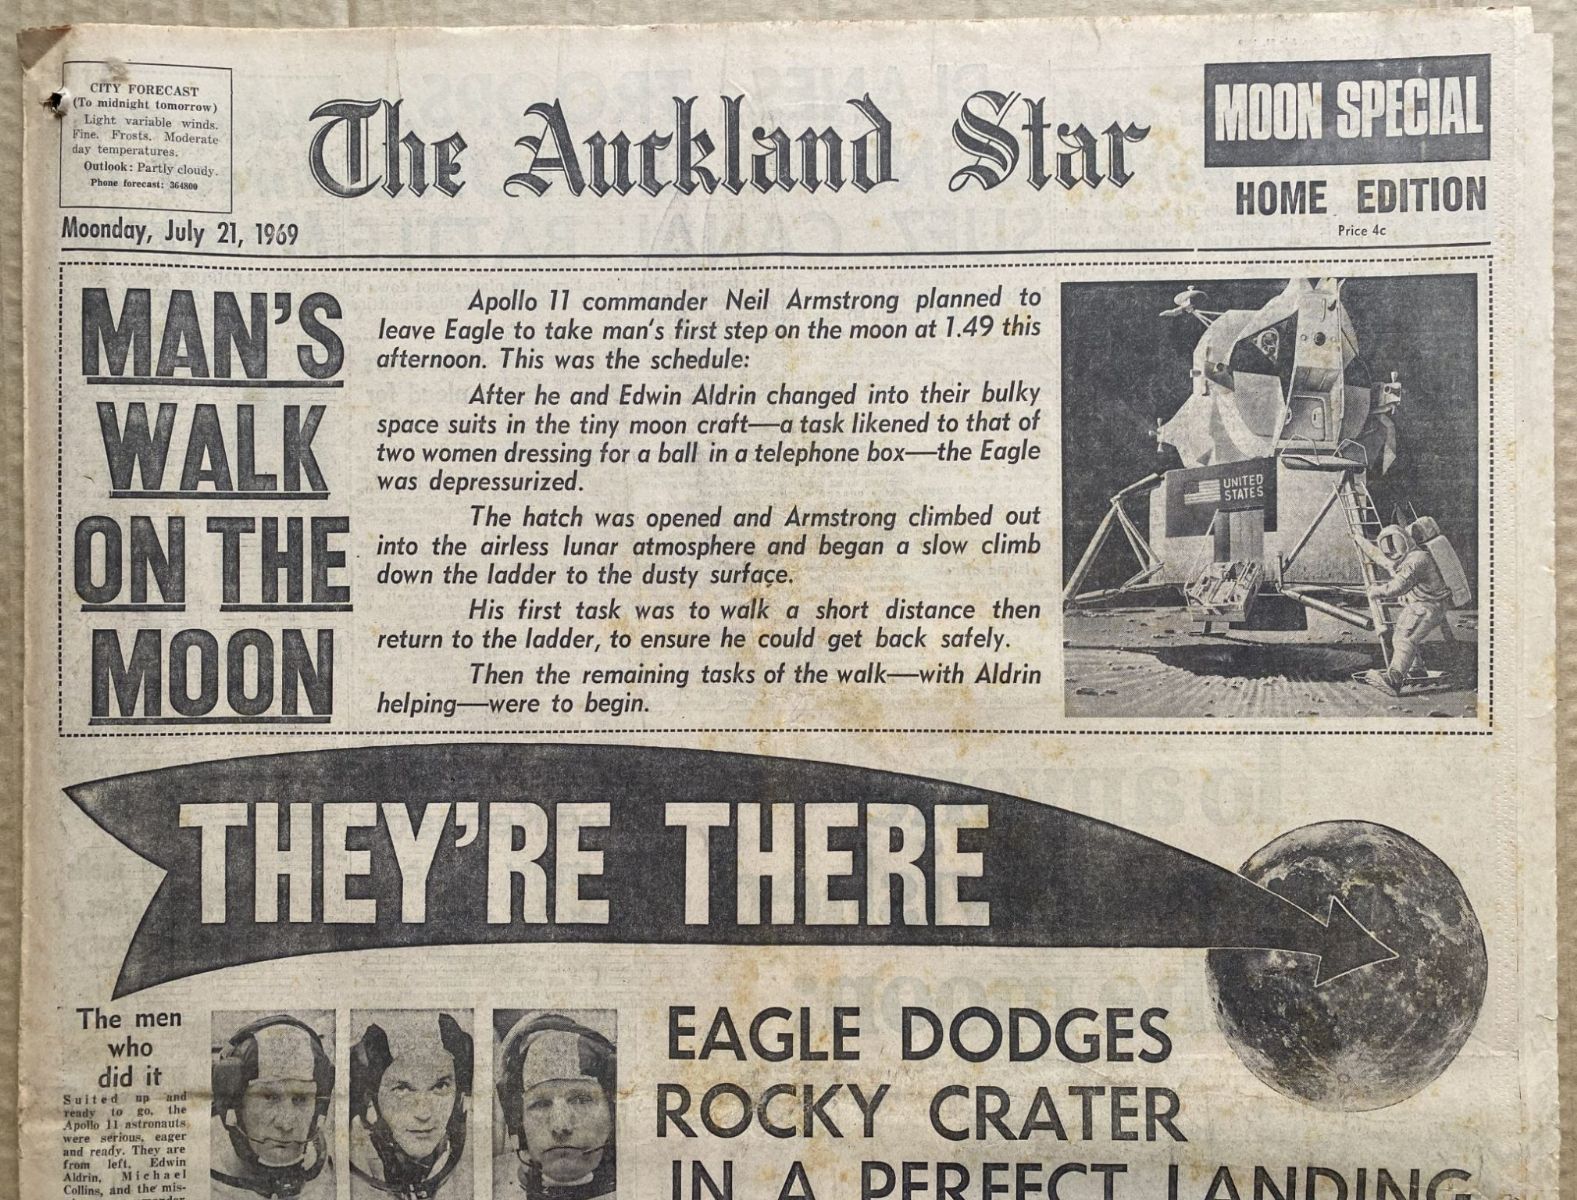 OLD NEWSPAPER: The Auckland Star, 21 July 1969 - Moon Landing Special - Home Edition